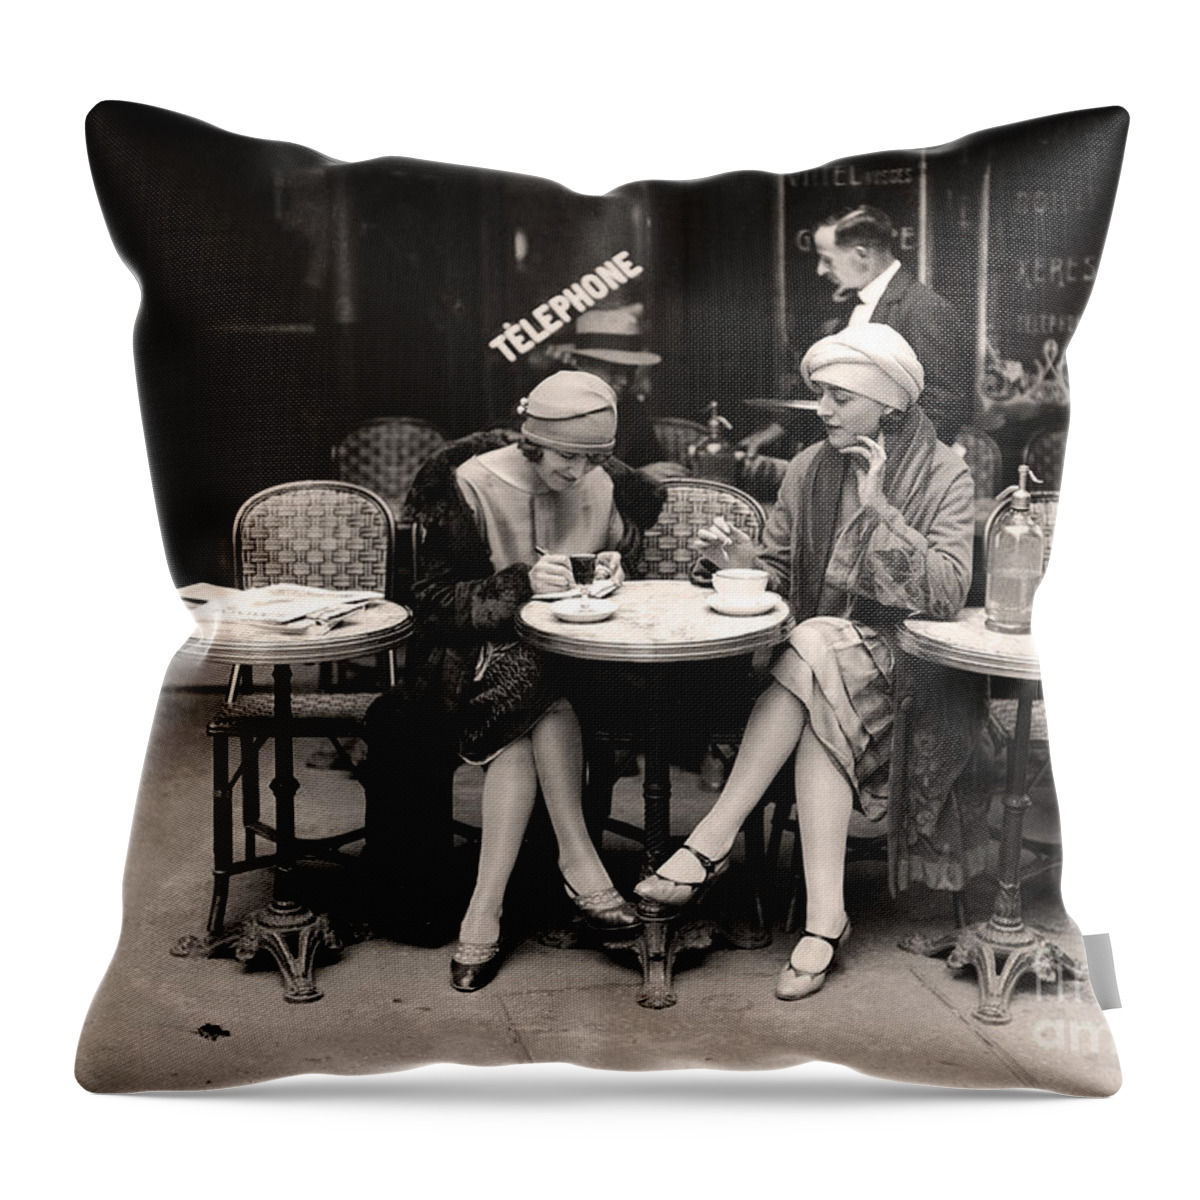 Vintage Paris Throw Pillow featuring the painting Vintage Paris Cafe by Mindy Sommers